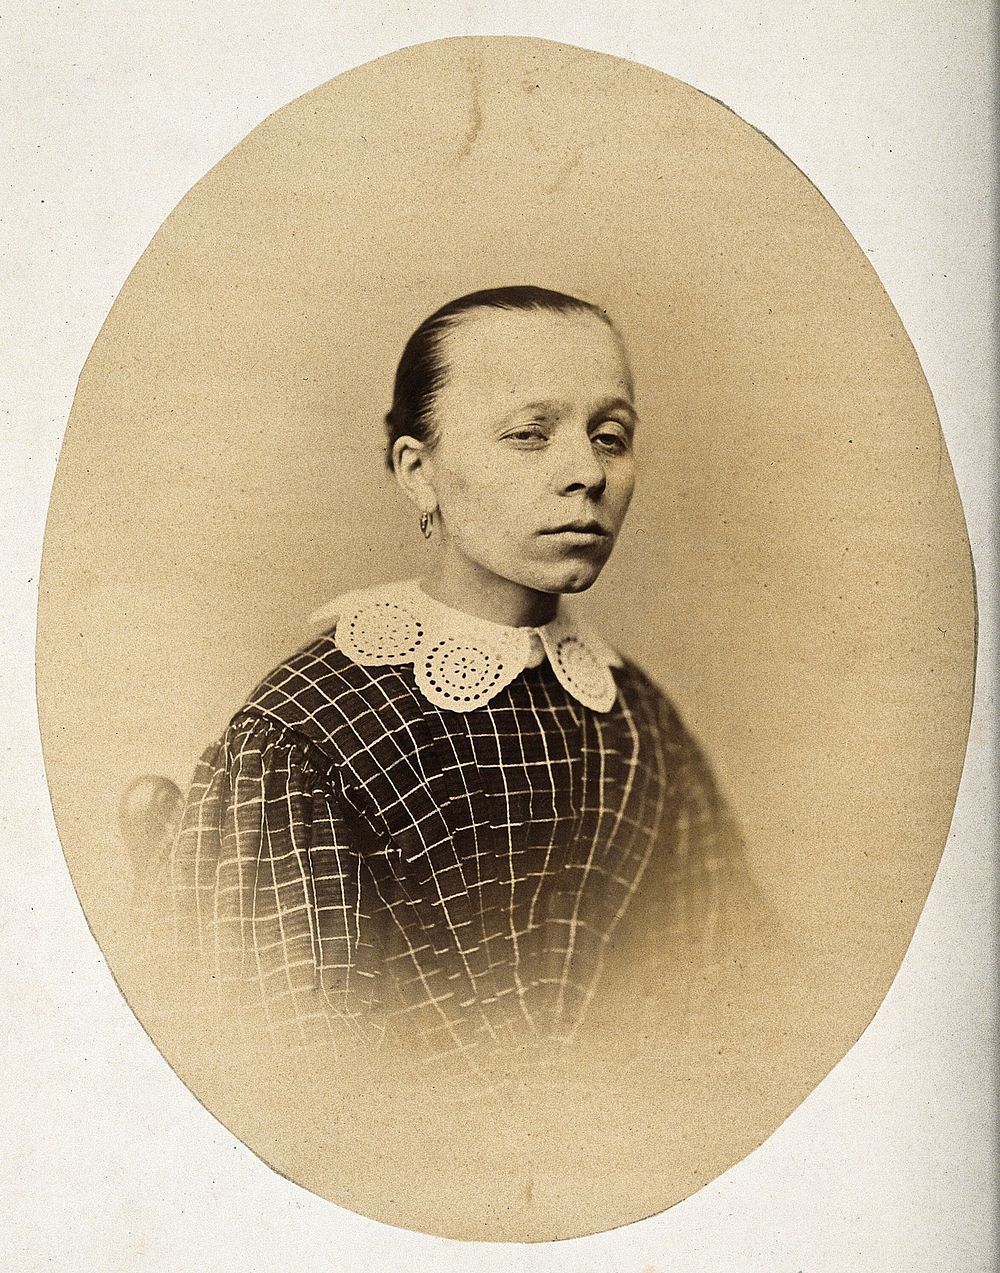 A woman, head and shoulders, viewed from the front; her eyelids are uneven. Photograph by L. Haase after H.W. Berend, 1863.